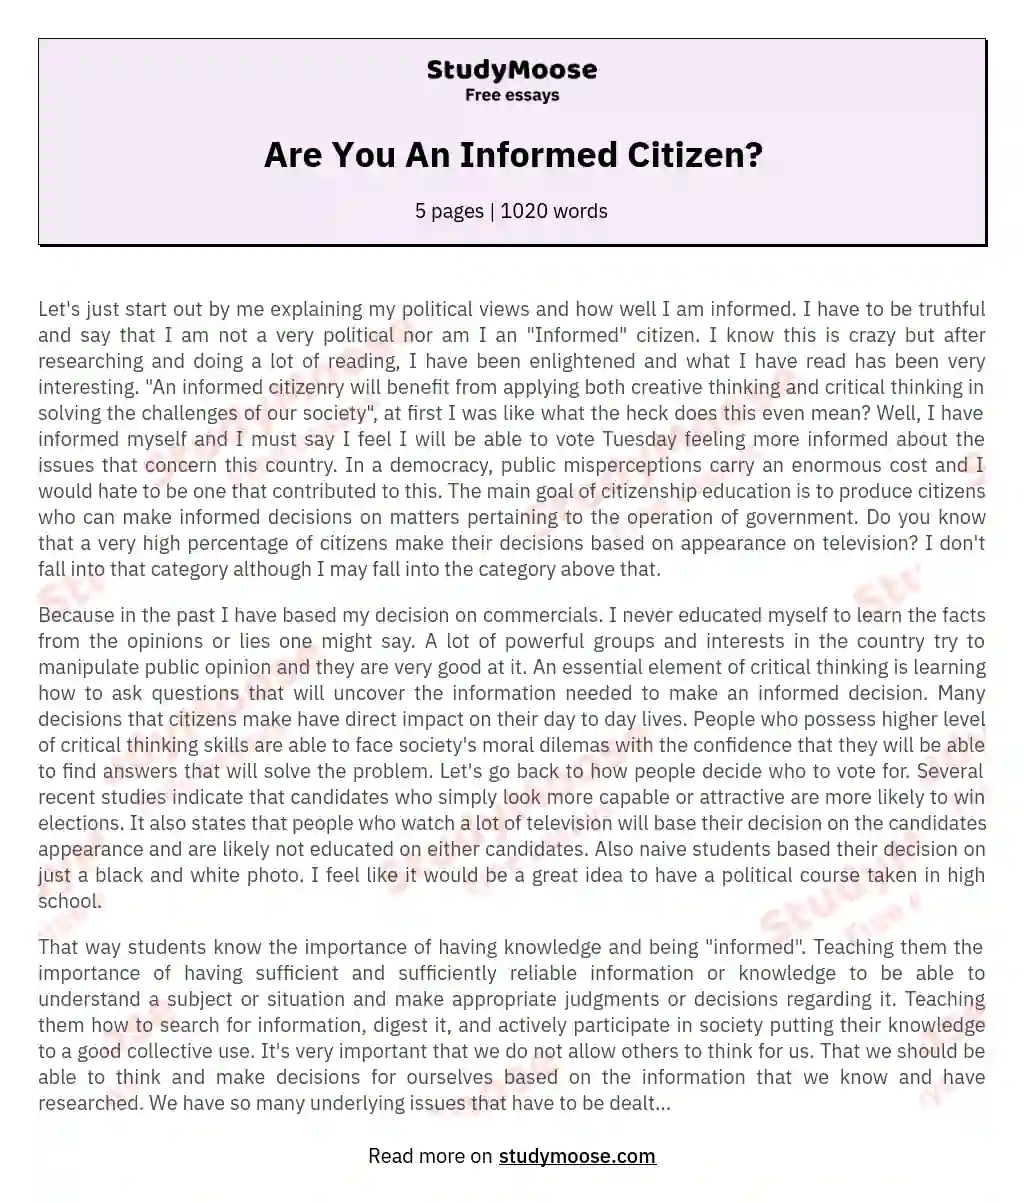 Are You An Informed Citizen? essay